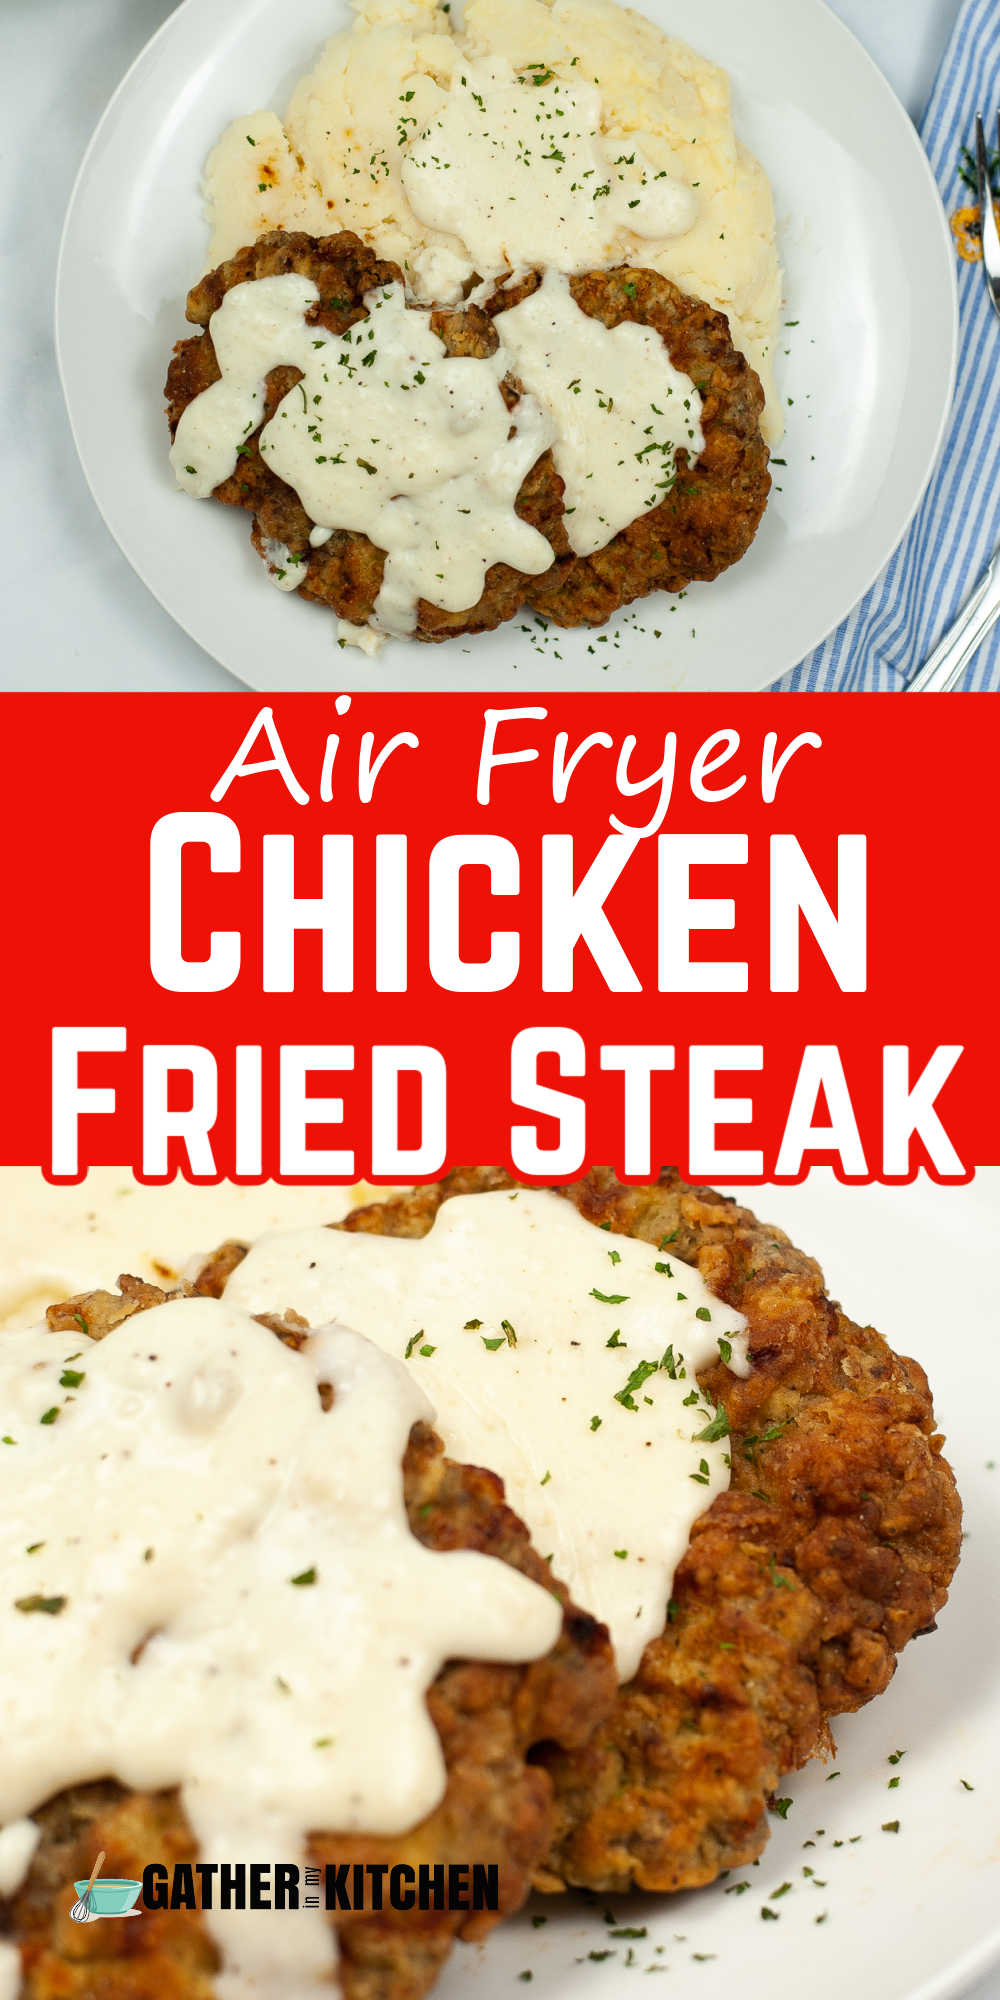 Pin image: top is chicken fried steak and potatoes on a plate, middle says "Air fryer chicken fried steak" and bottom is a closeup of chicken fried steak with gravy over the top.